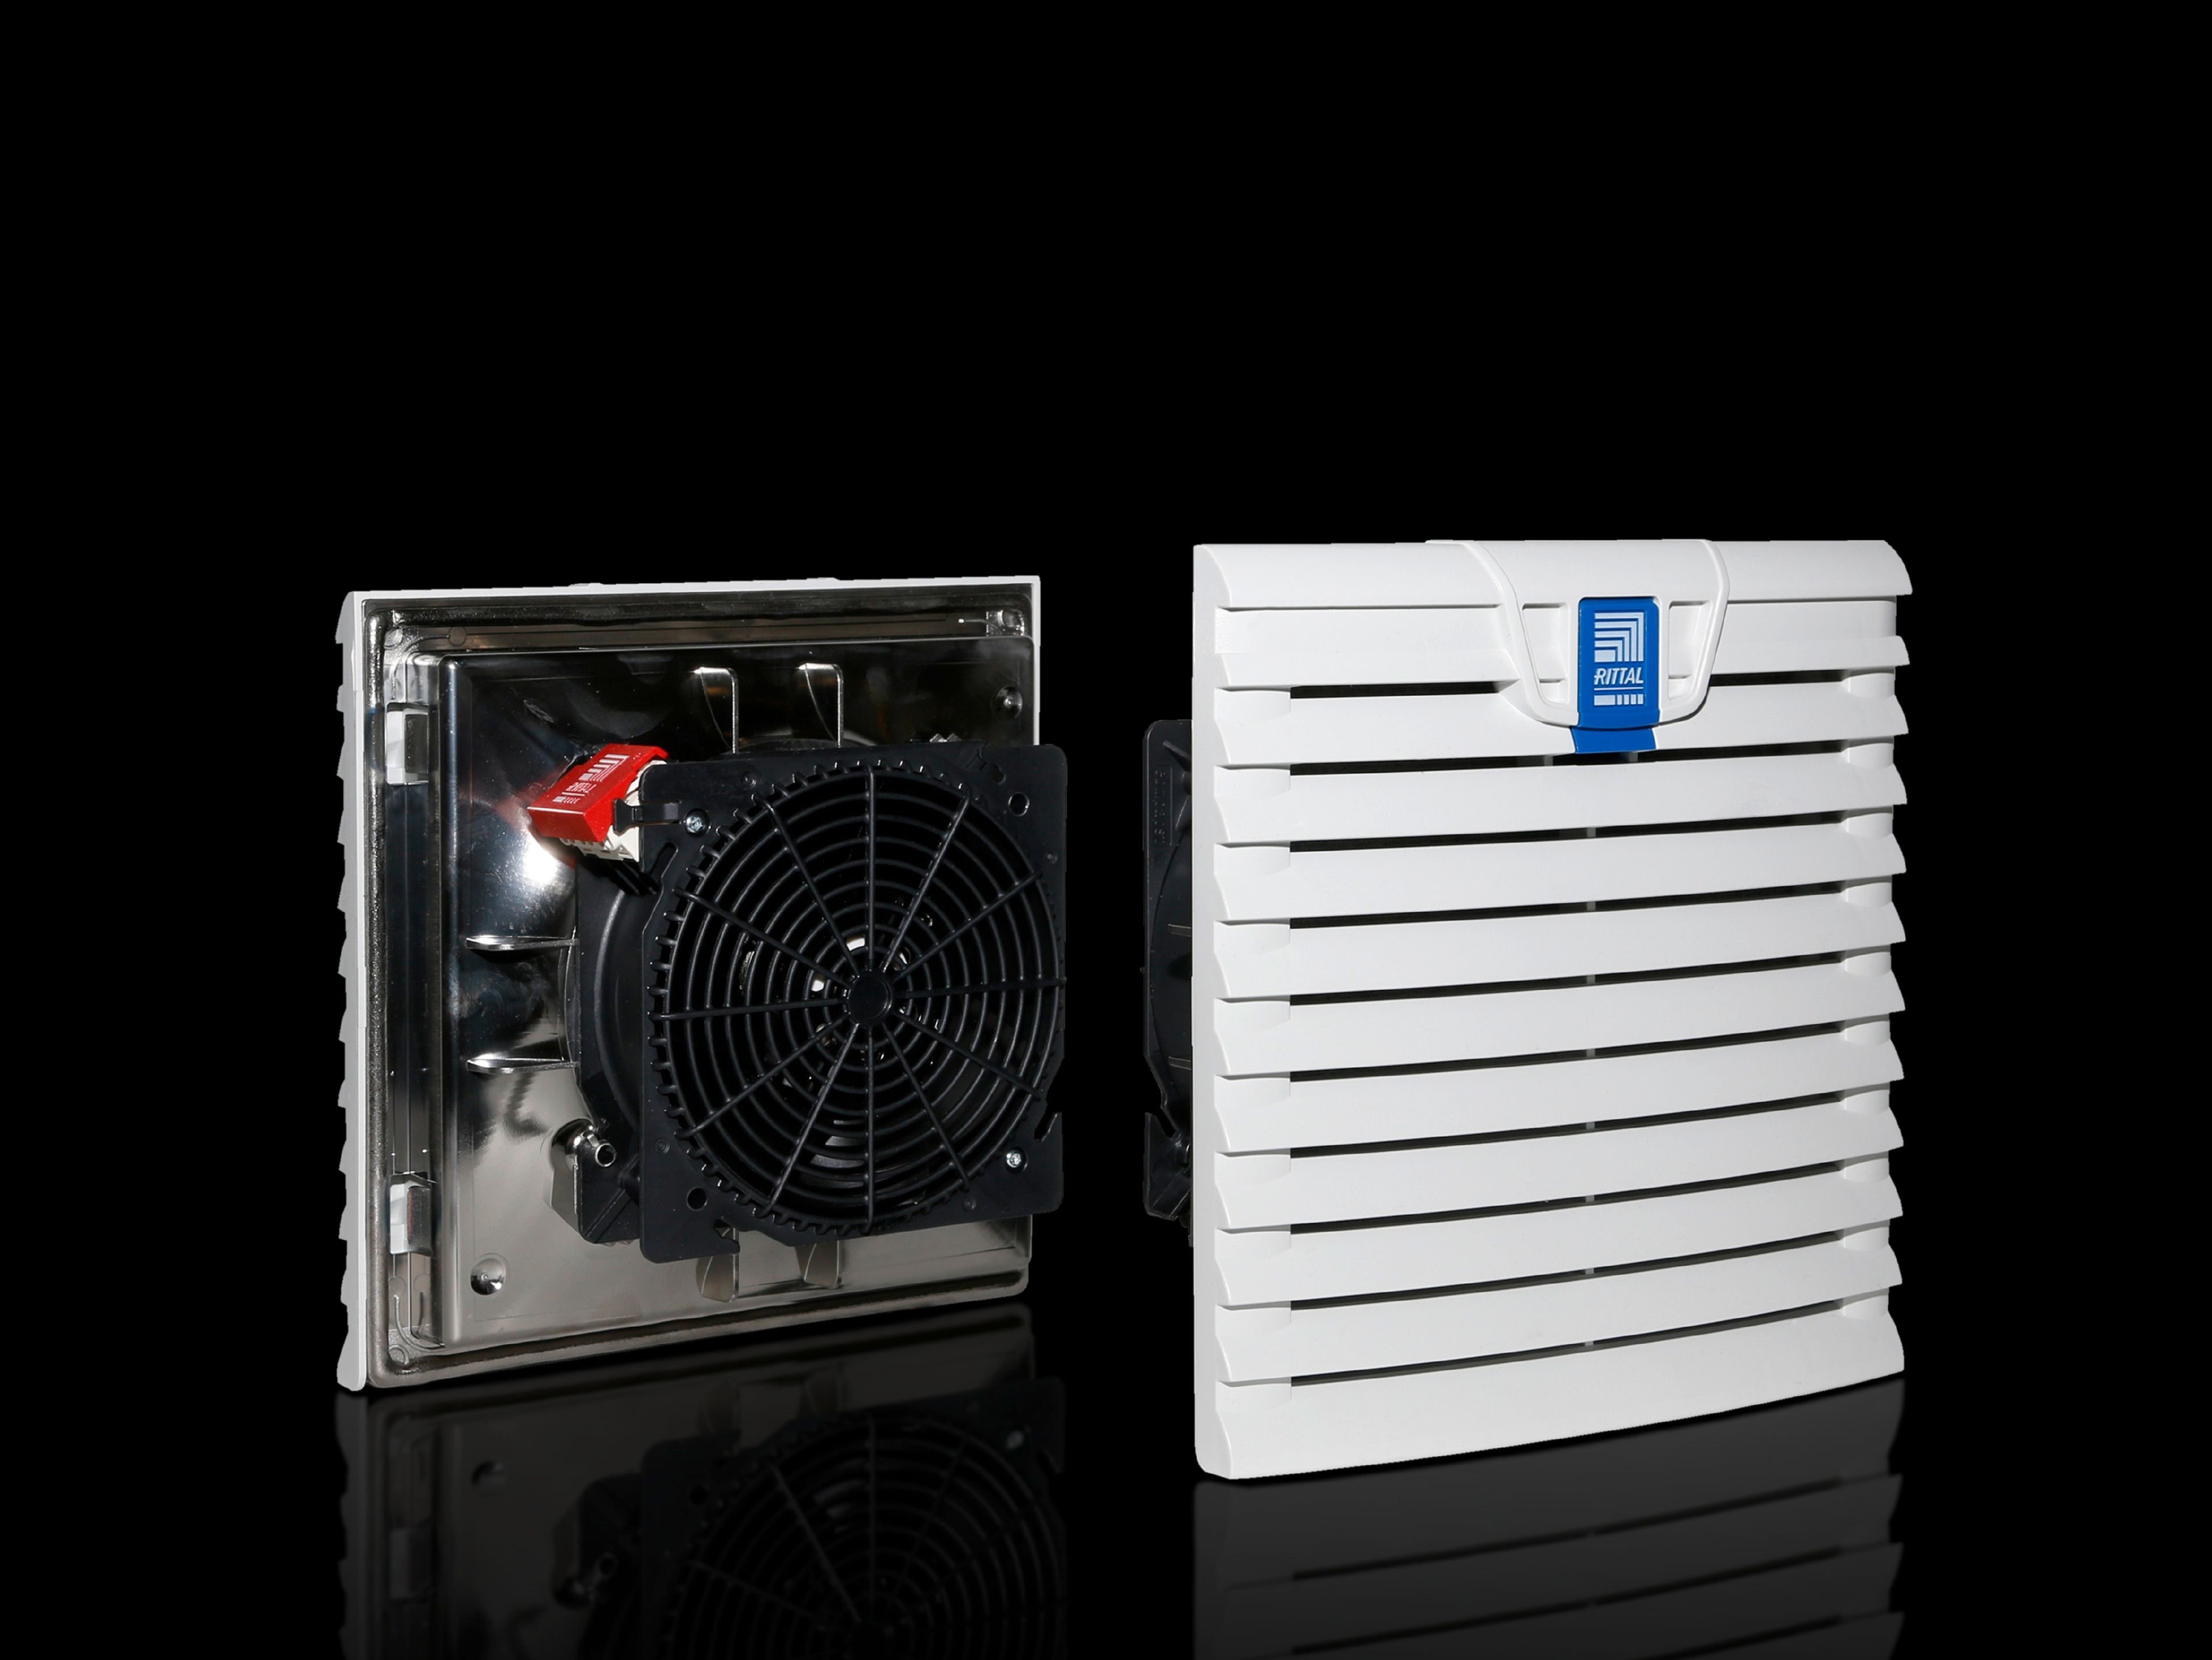 SK3239600 Rittal Air Conditioner Filter Fan, 100m3/h, 230V 19W, Width 204 Height 204, Opening Width 177 Height 177, EMC diagonal flow self-starting shrouded pole motor - Made in Germany by Rittal - Rittal Cabinet Air Conditioning, Rittal Power Cabinet, Rittal Busbar, Rittal Fan SK3239.600